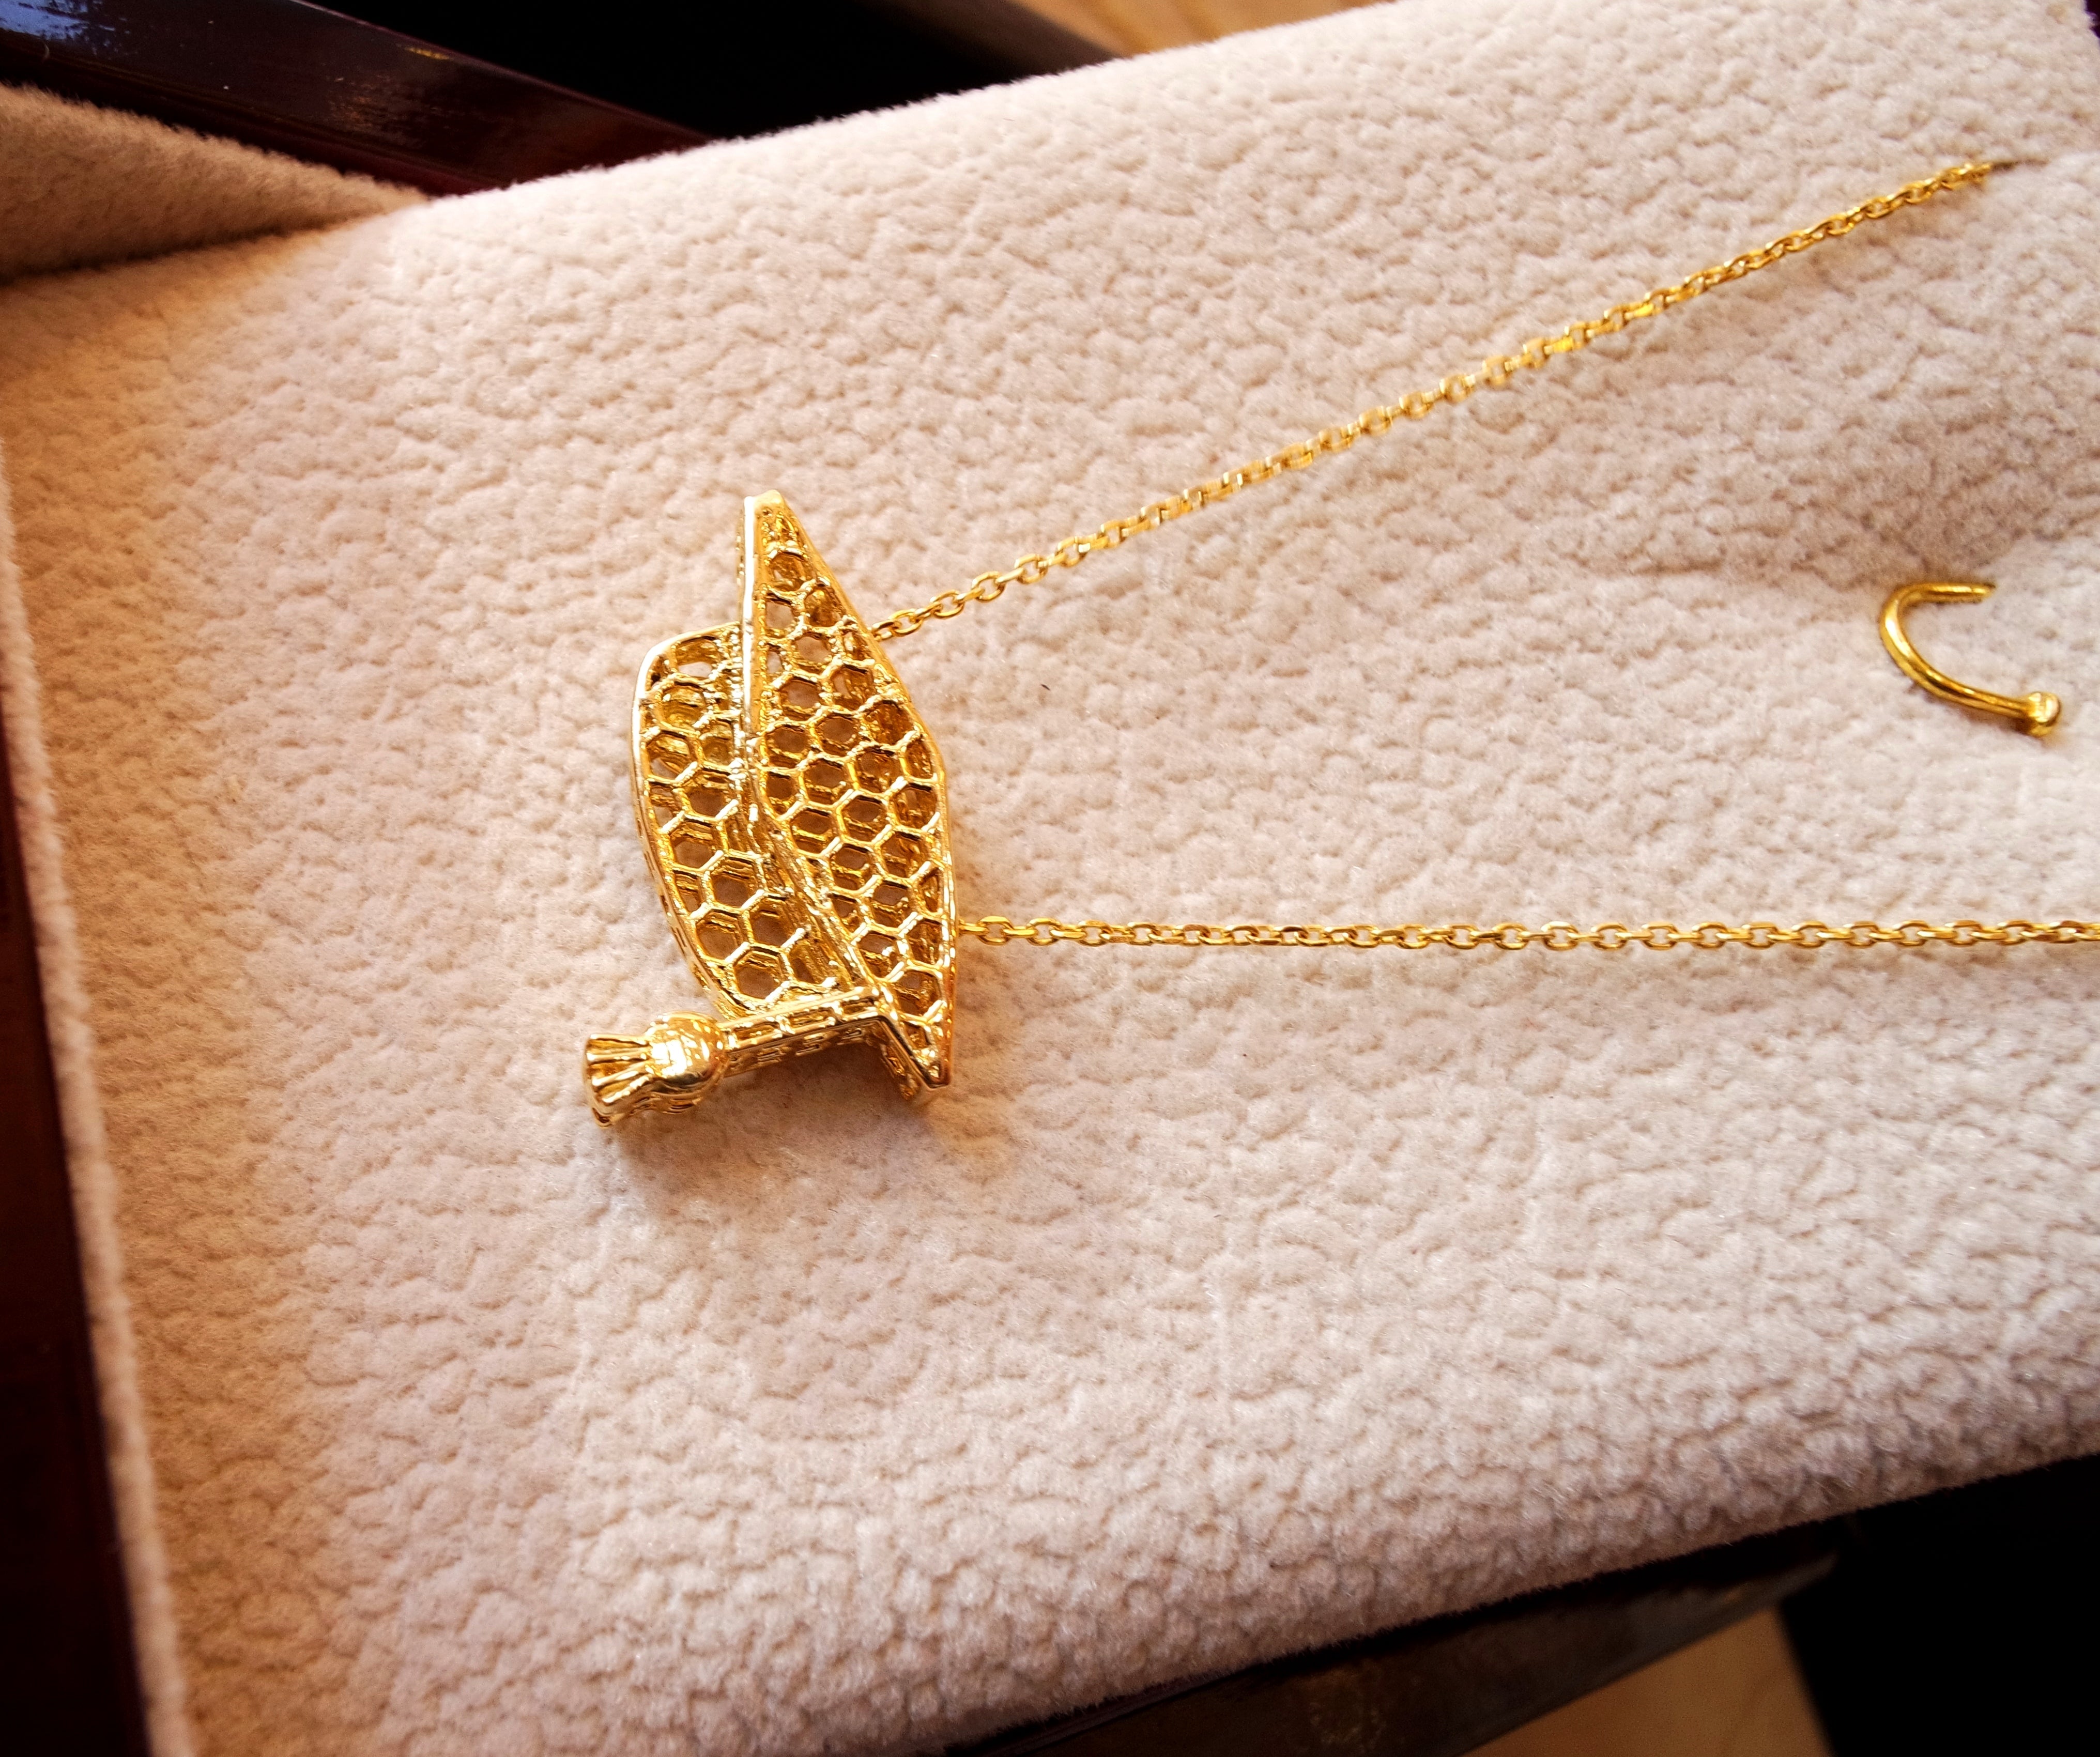 Honeycomb graduate hat cap graduation gift 3d 18K yellow gold necklace pendant and chain fine jewelry full insured shipping